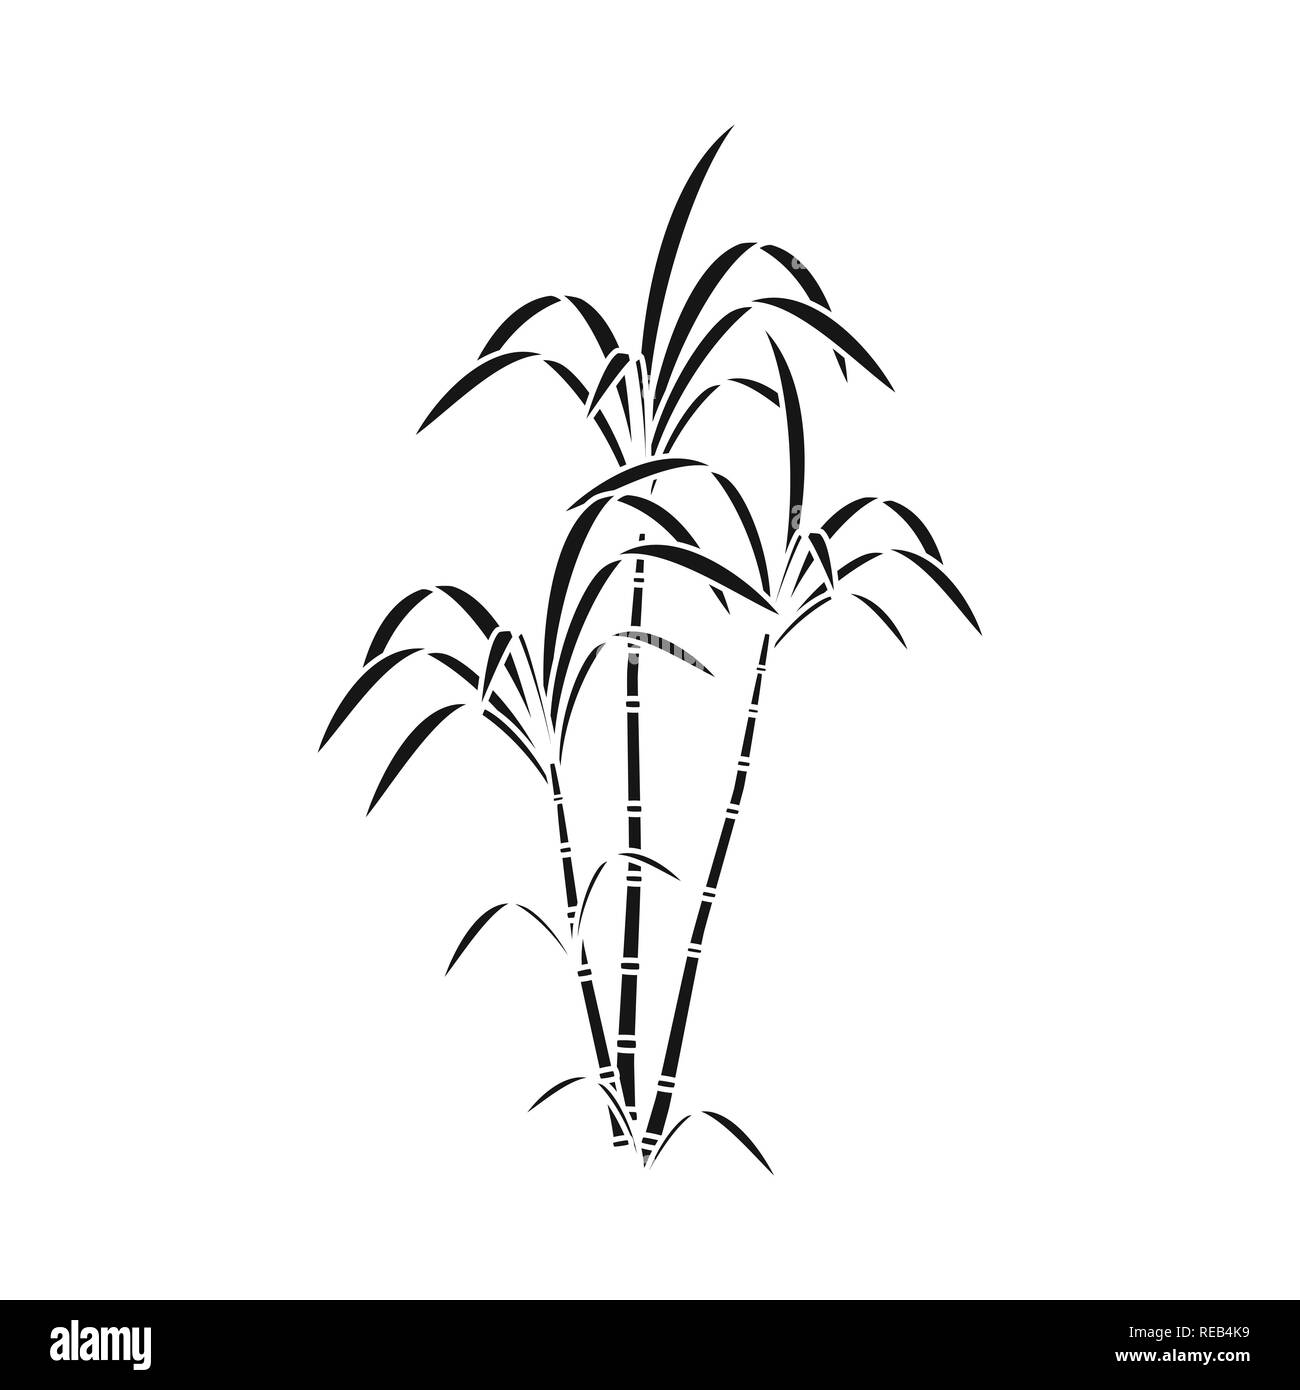 bush,palm,growth,branch,juice,leaf,pillar,green,africa,india,sugarcane,cane,sugar,field,plant,plantation,farm,agriculture,sucrose,technology,set,vector,icon,illustration,isolated,collection,design,element,graphic,sign,black,simple, Vector Vectors , Stock Vector